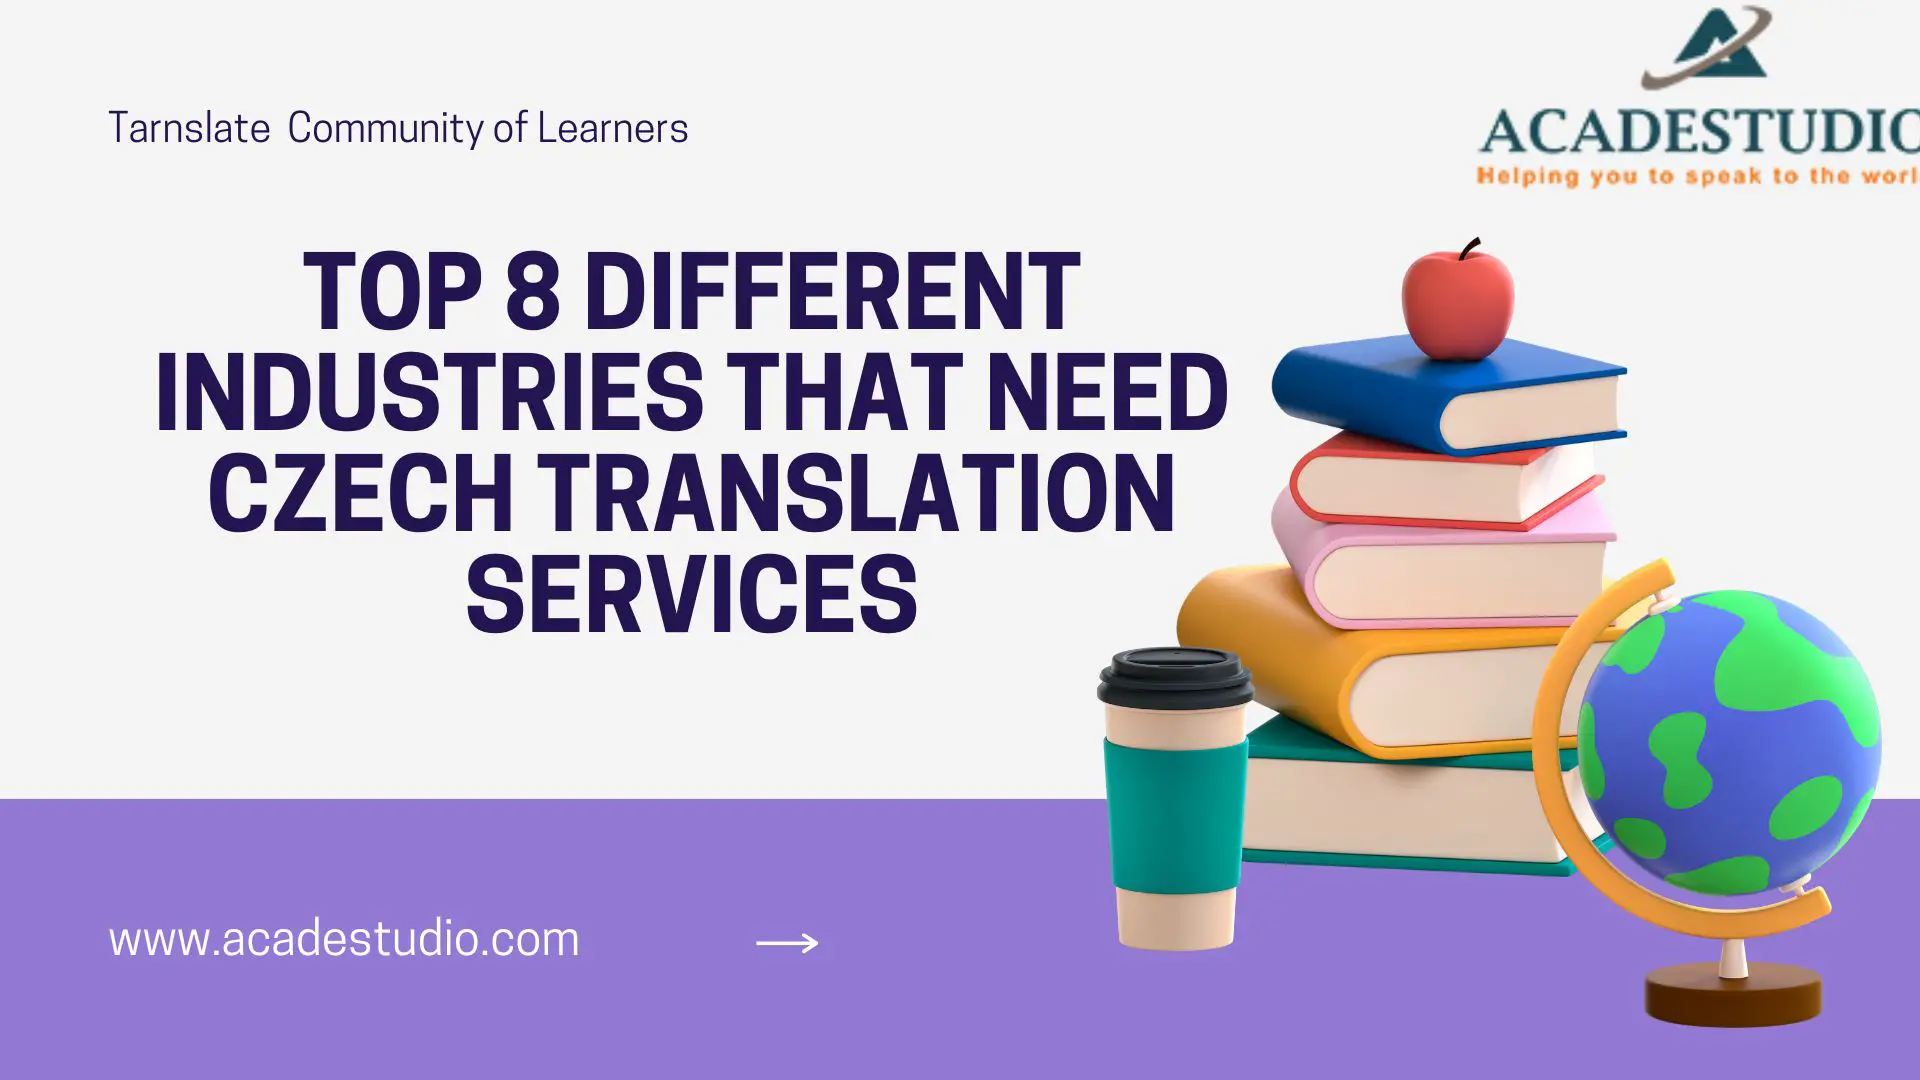 TOP 8 DIFFERENT INDUSTRIES THAT NEED CZECH TRANSLATION SERVICES-b0ad3521